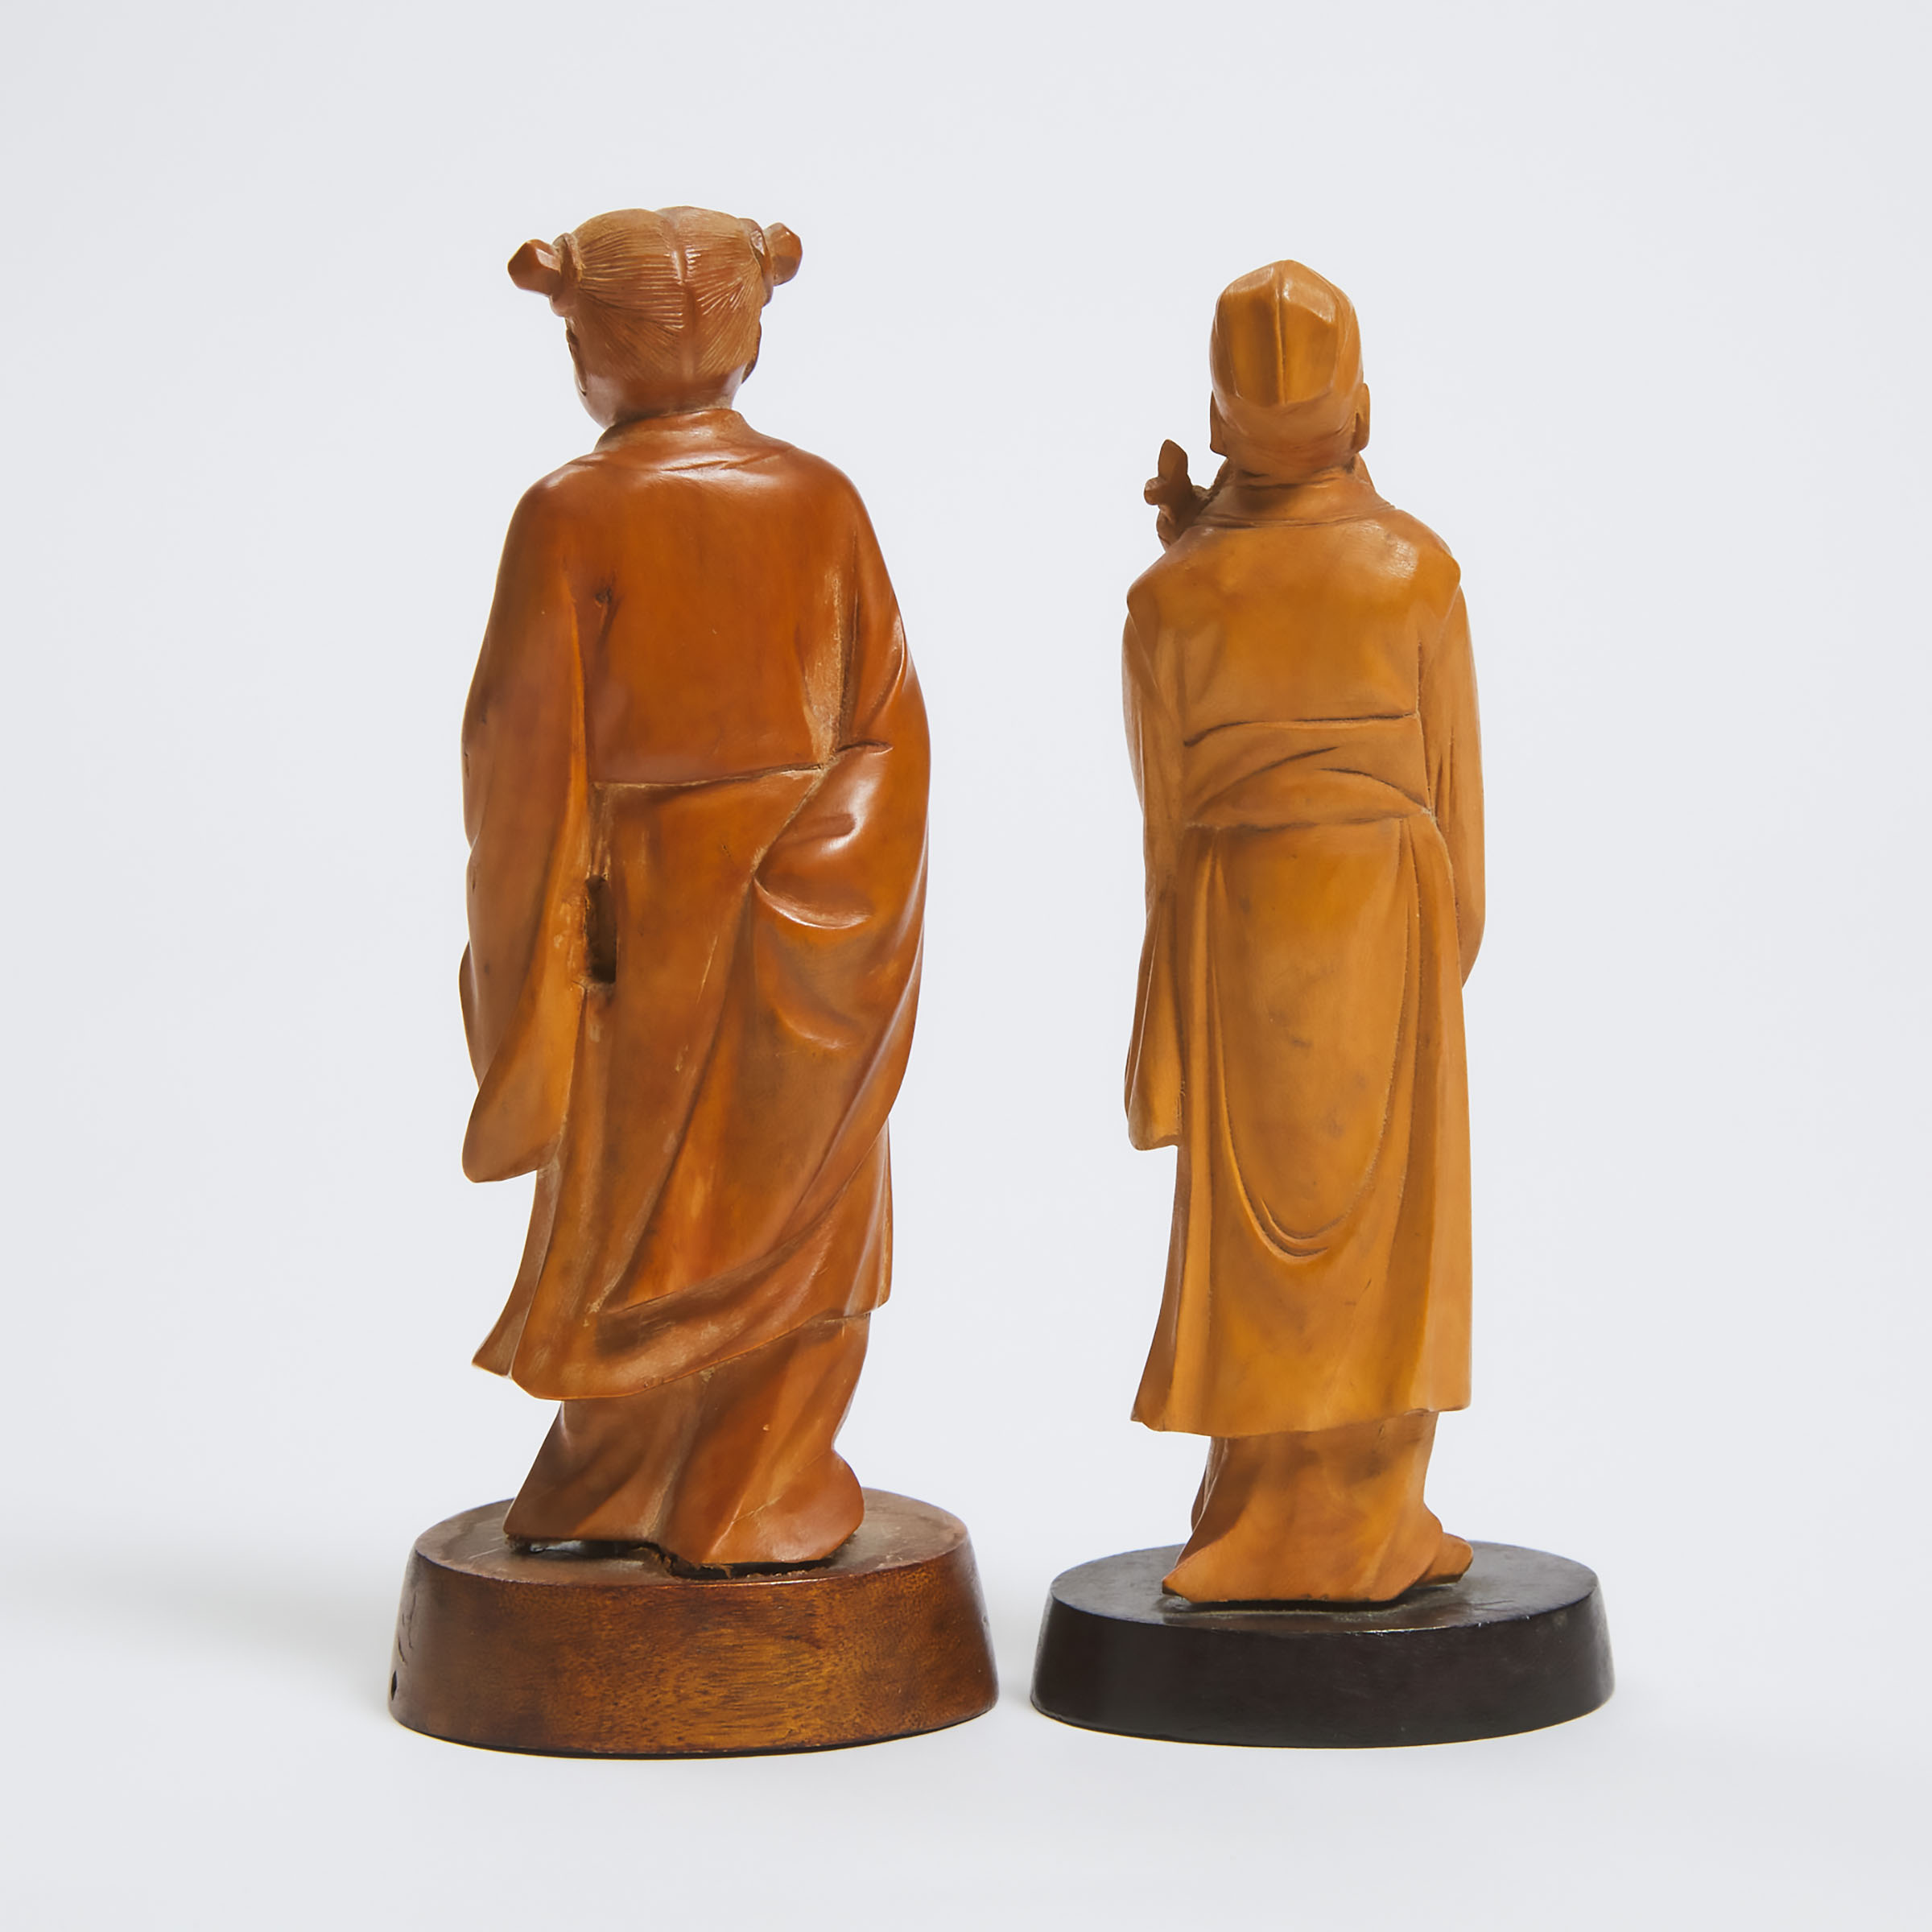 A Boxwood Figure of the Daoist Immortal Lan Caihe, Together With a Daoist Scholar, Republican Period, Early to Mid 20th Century